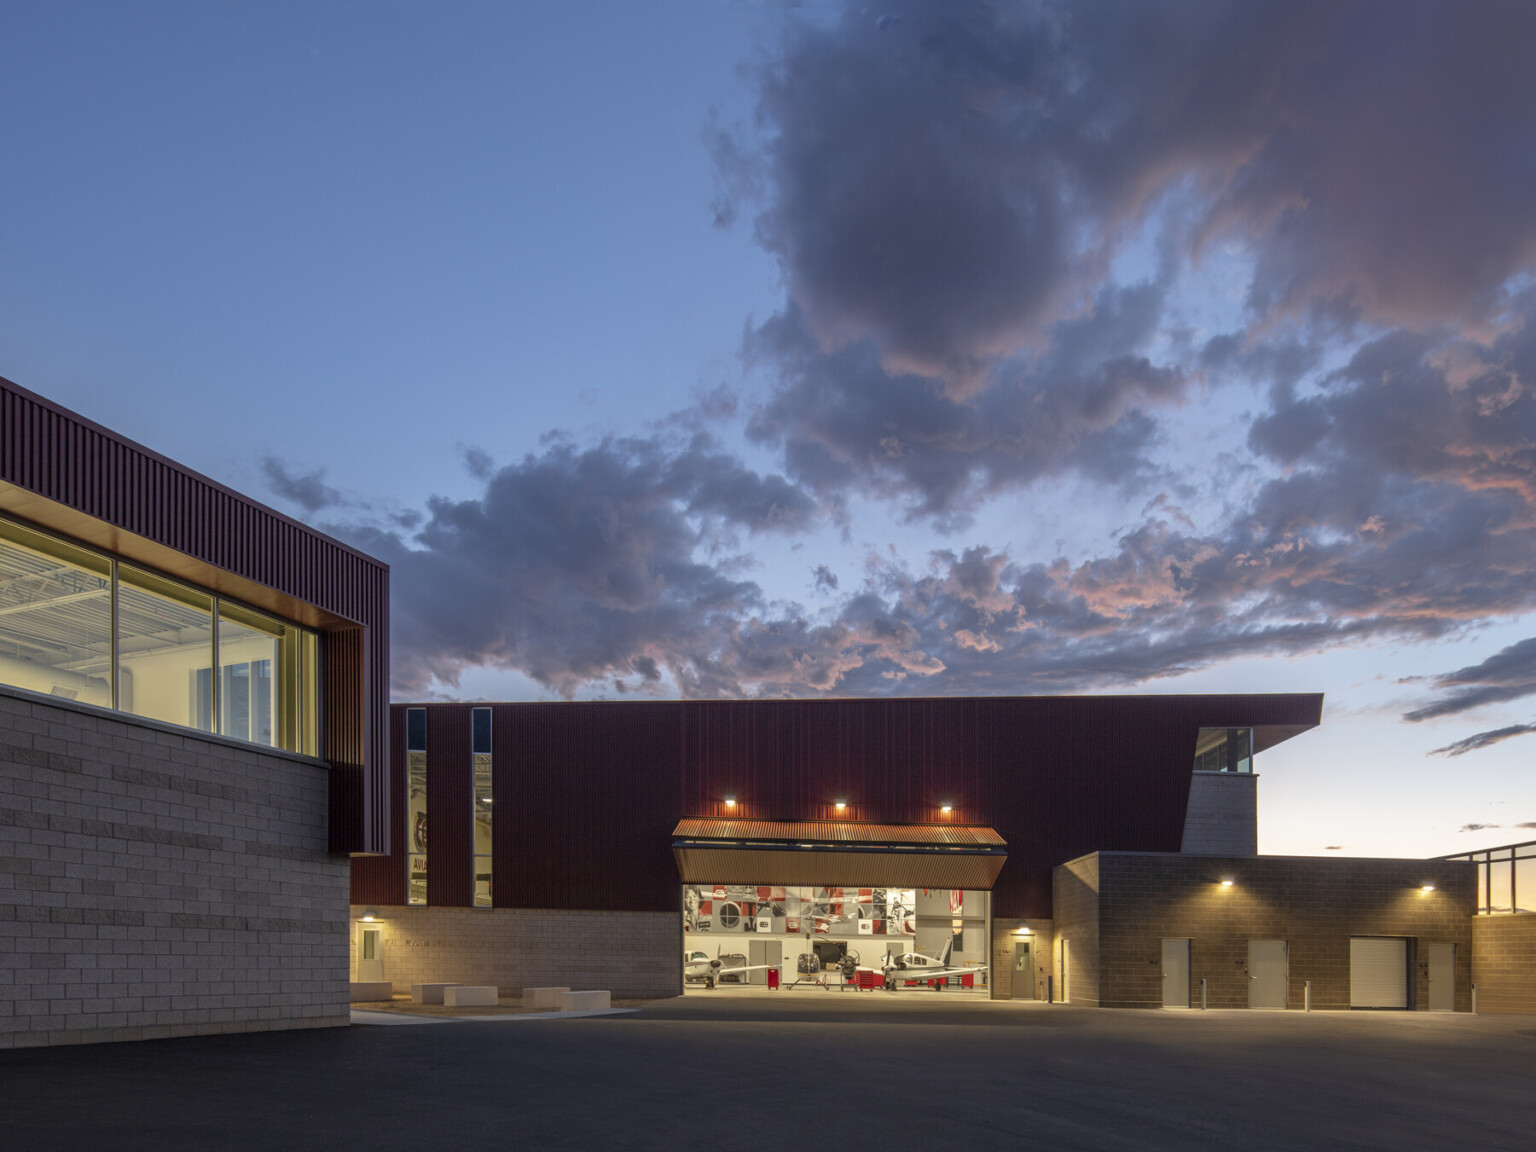 Stone building with textured red wrap facade illuminated from within in evening. Garage door opened at center to airplanes